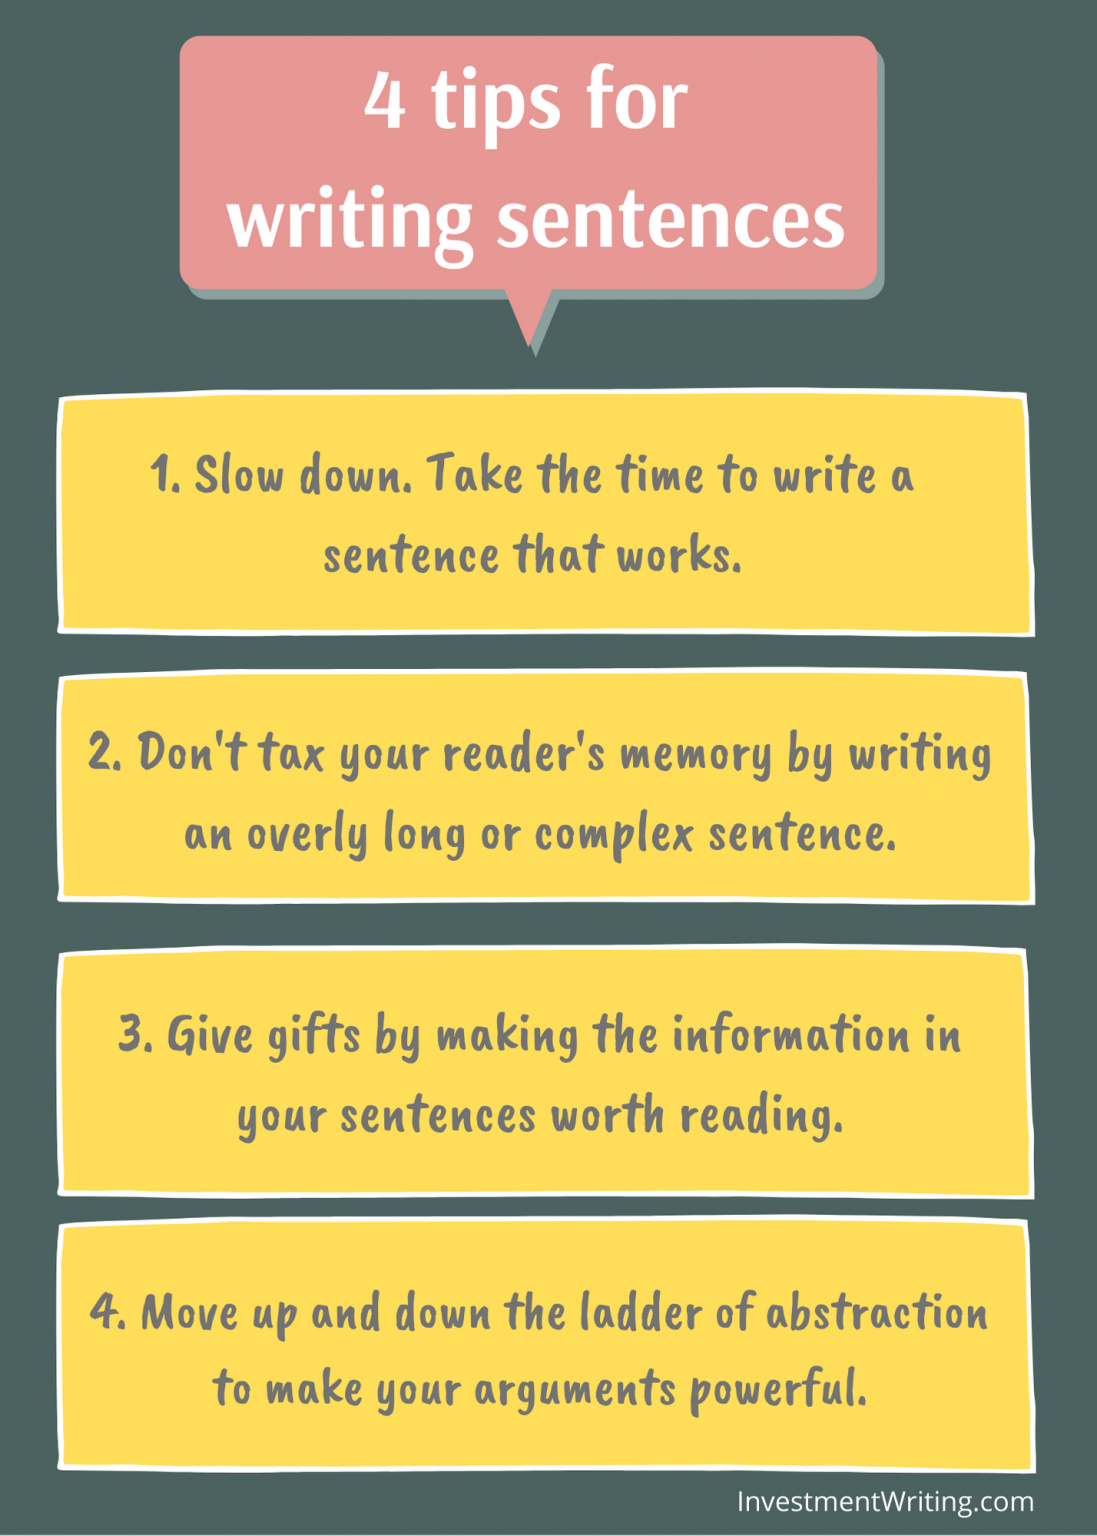 4-great-tips-for-writing-sentences-susan-weiner-investment-writing